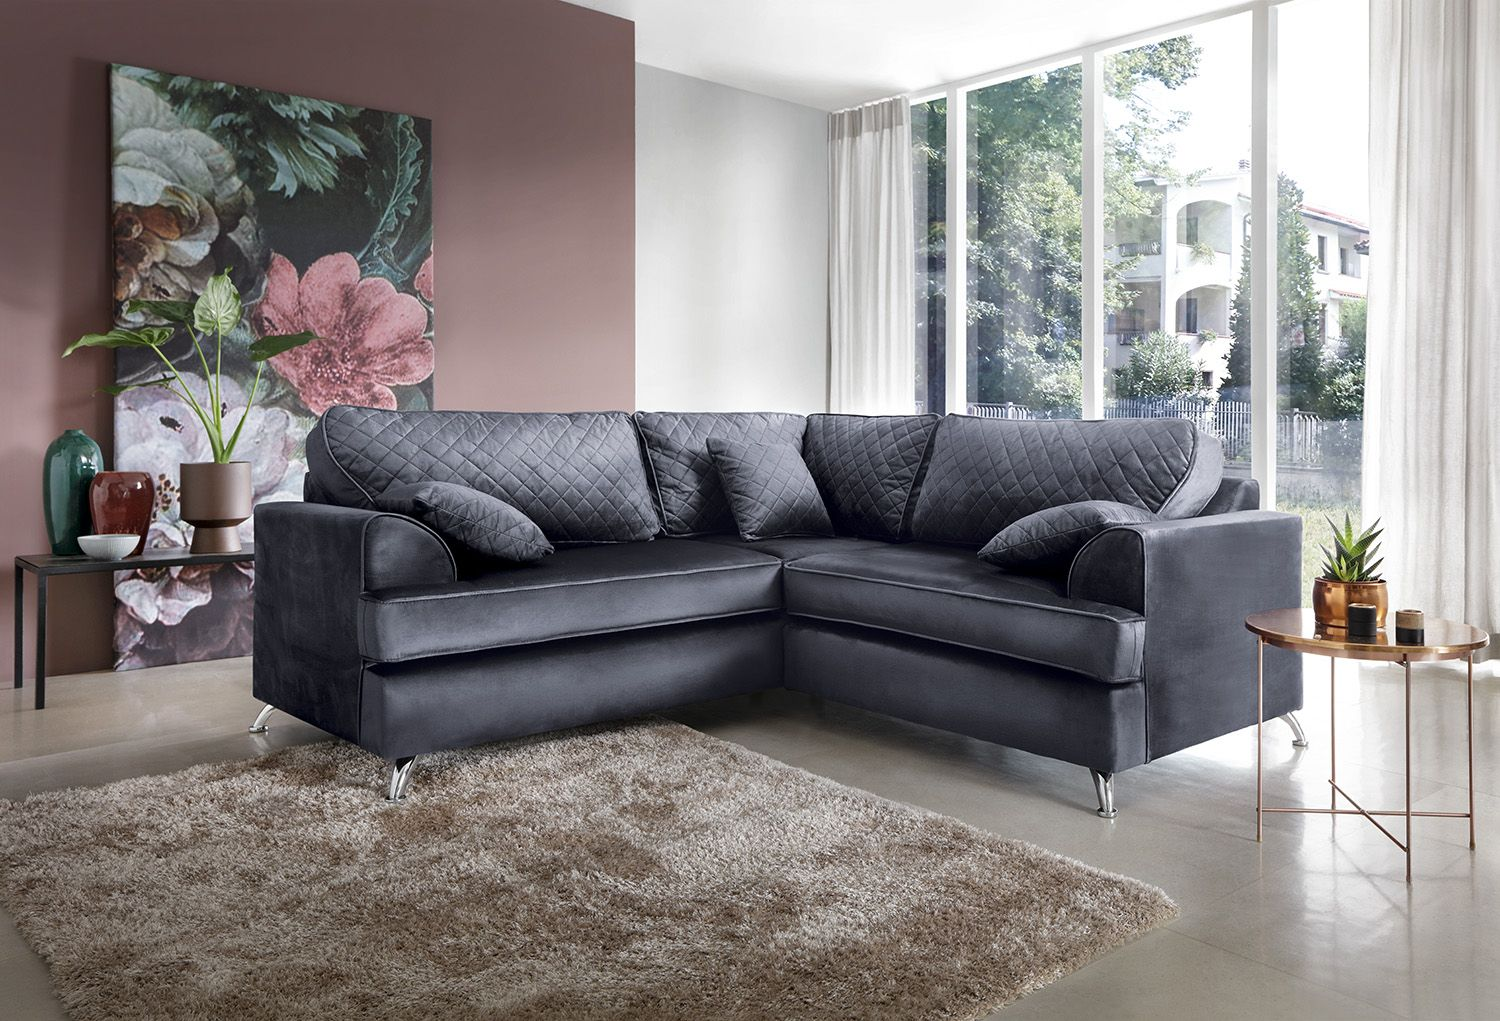 What Curtains For Sofa Colour, Curtains To Match Black Leather Sofa